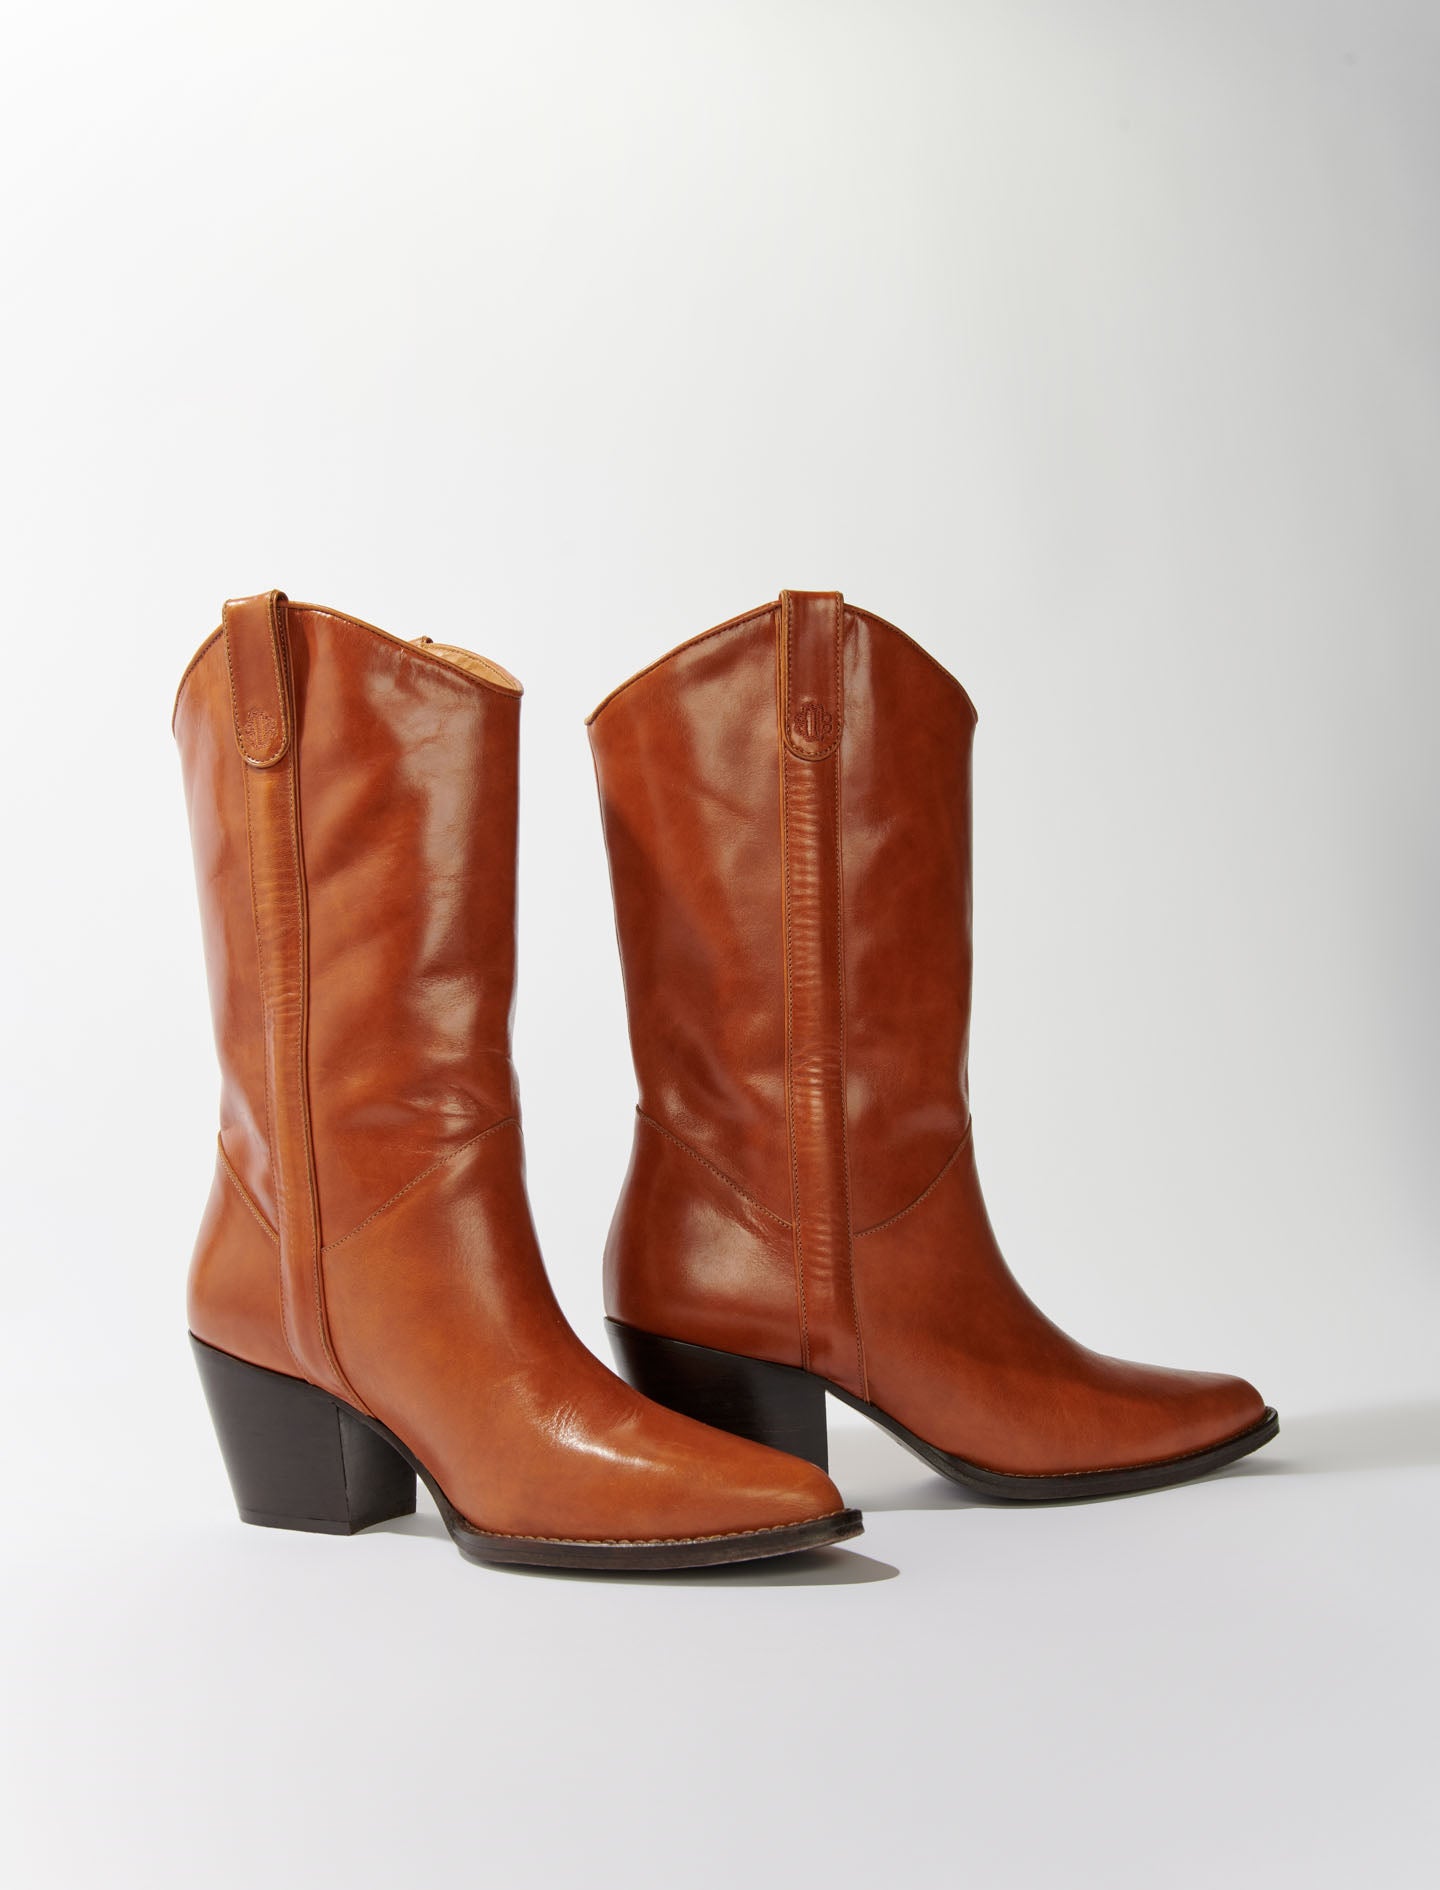 Camel featured Heeled leather boots